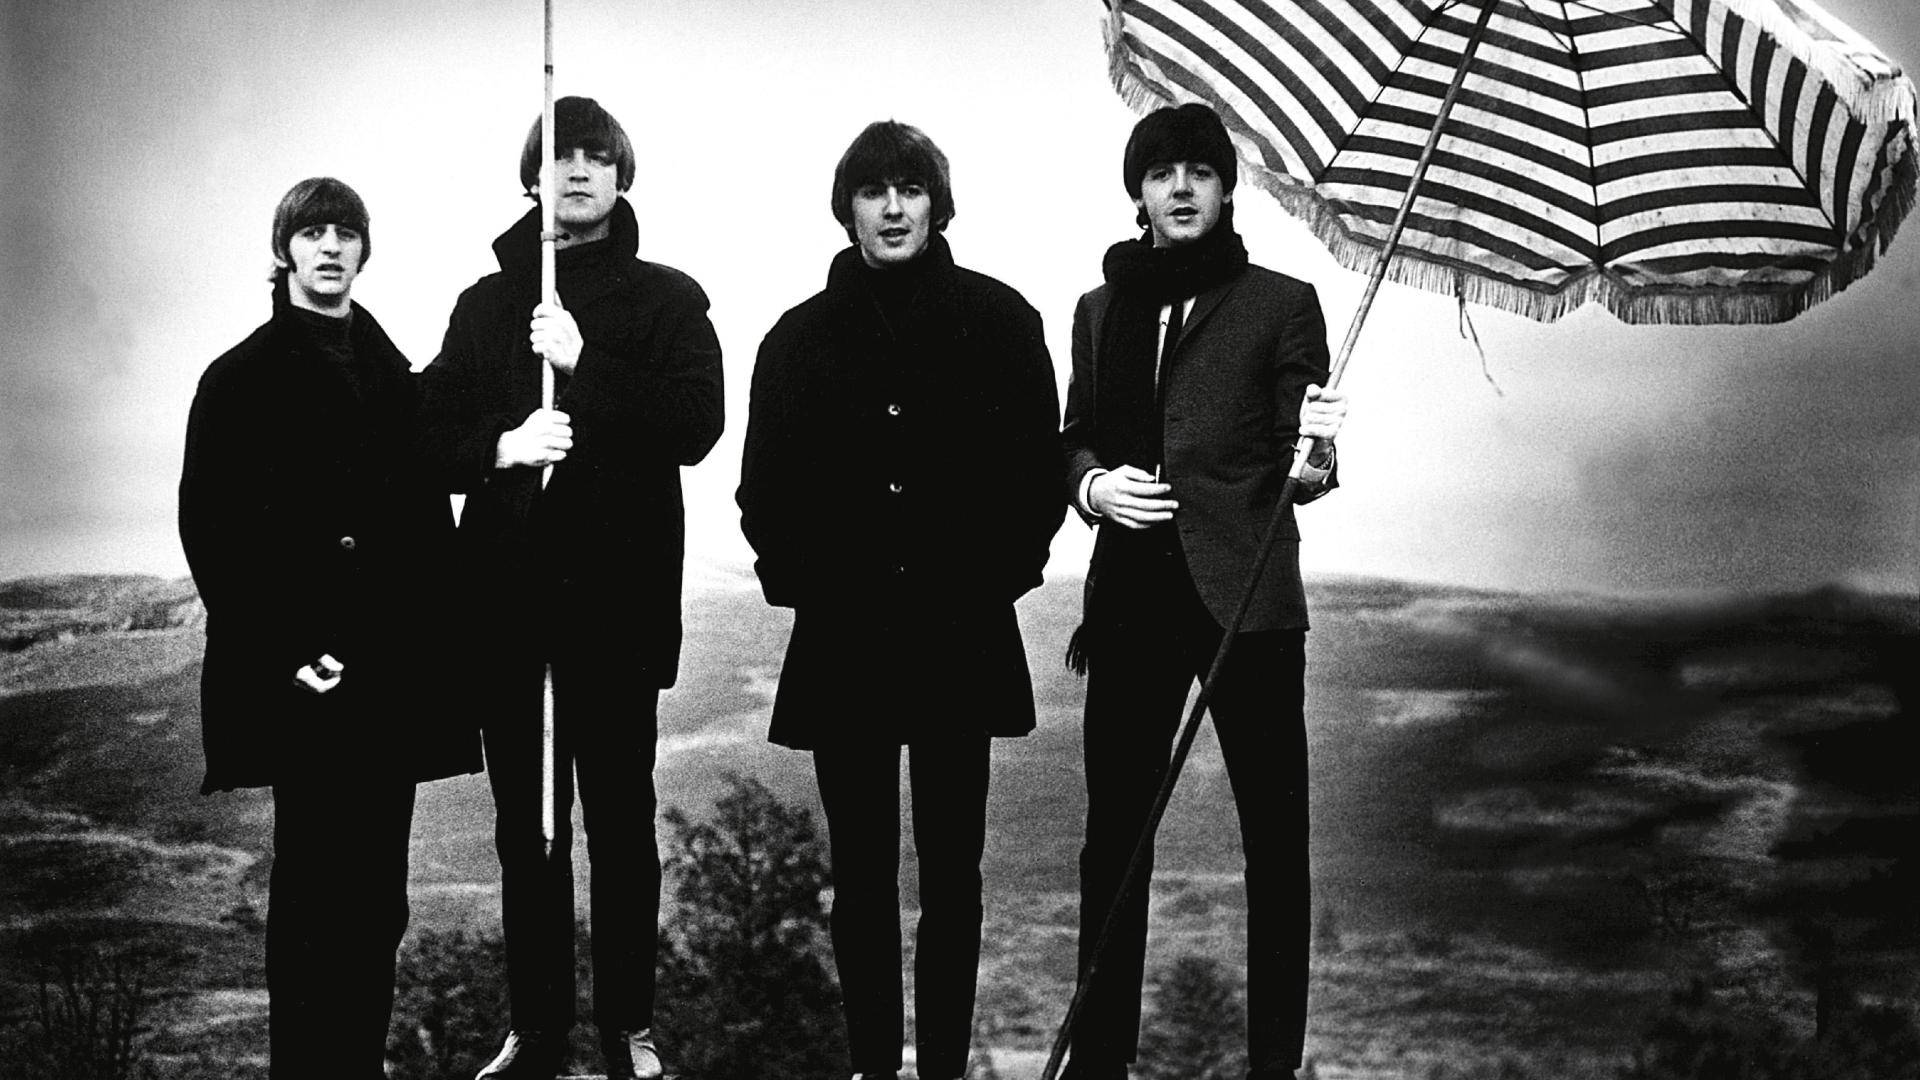 Thebeatles Med Paraplyer. Wallpaper